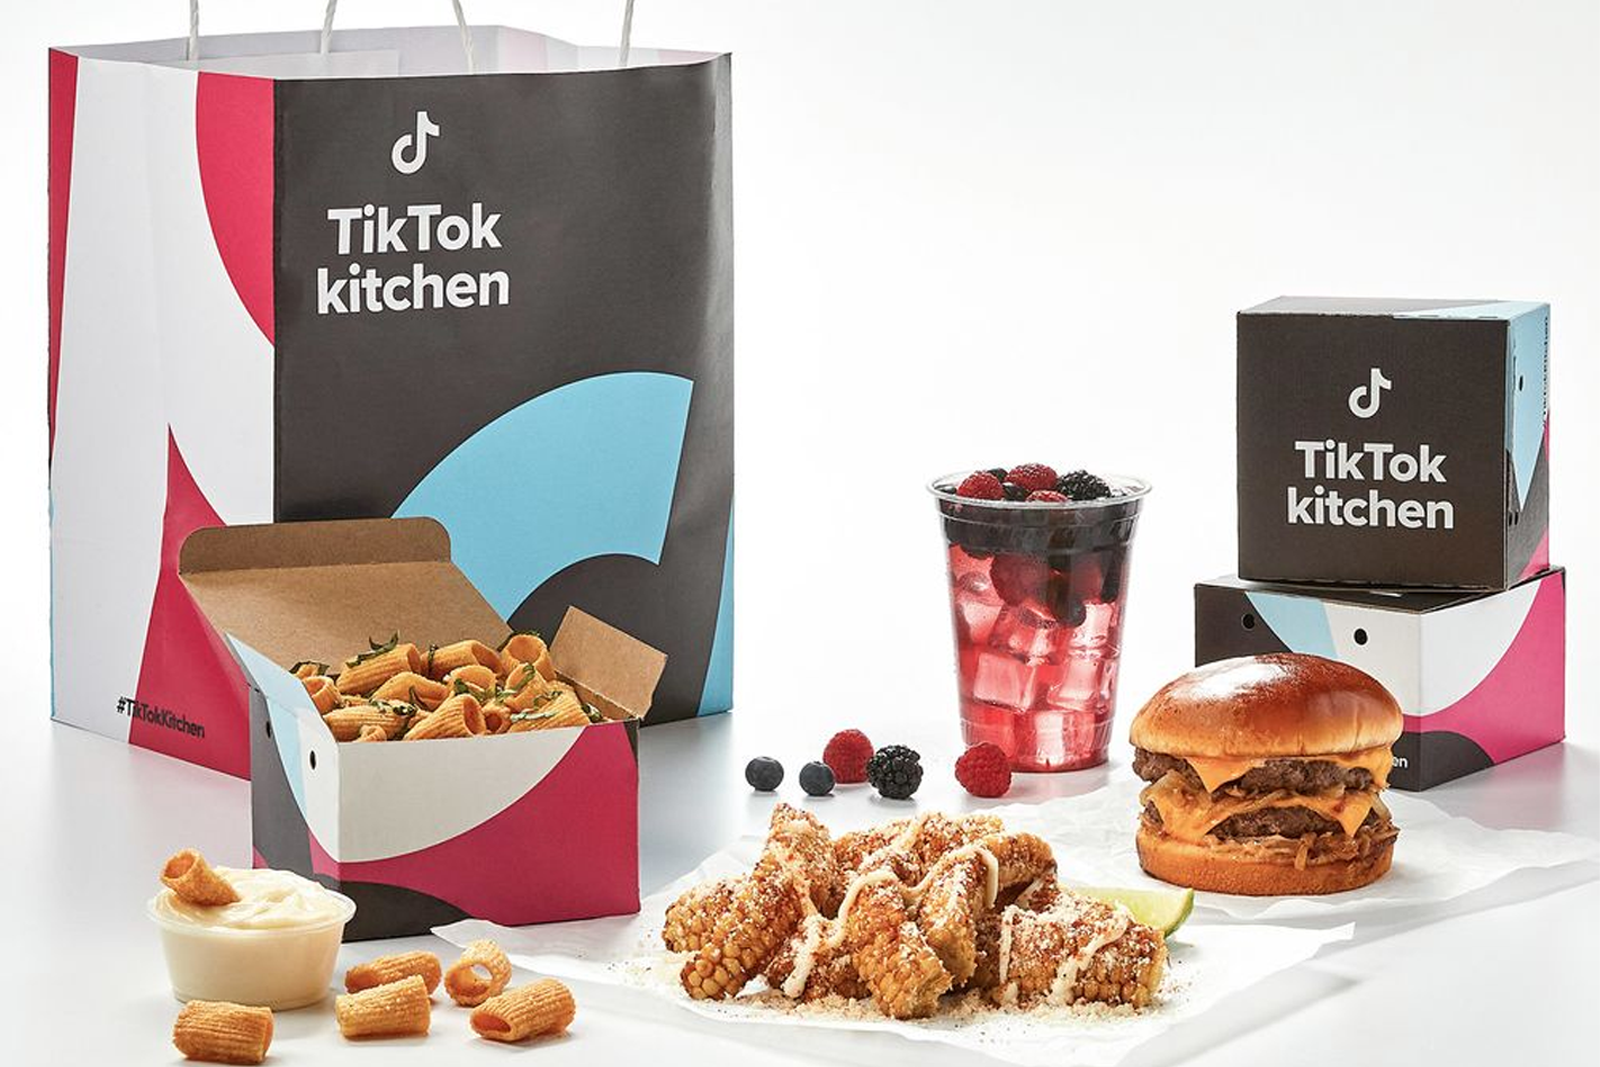 TikTok Kitchens will offer delivery-only viral food trends photo 1